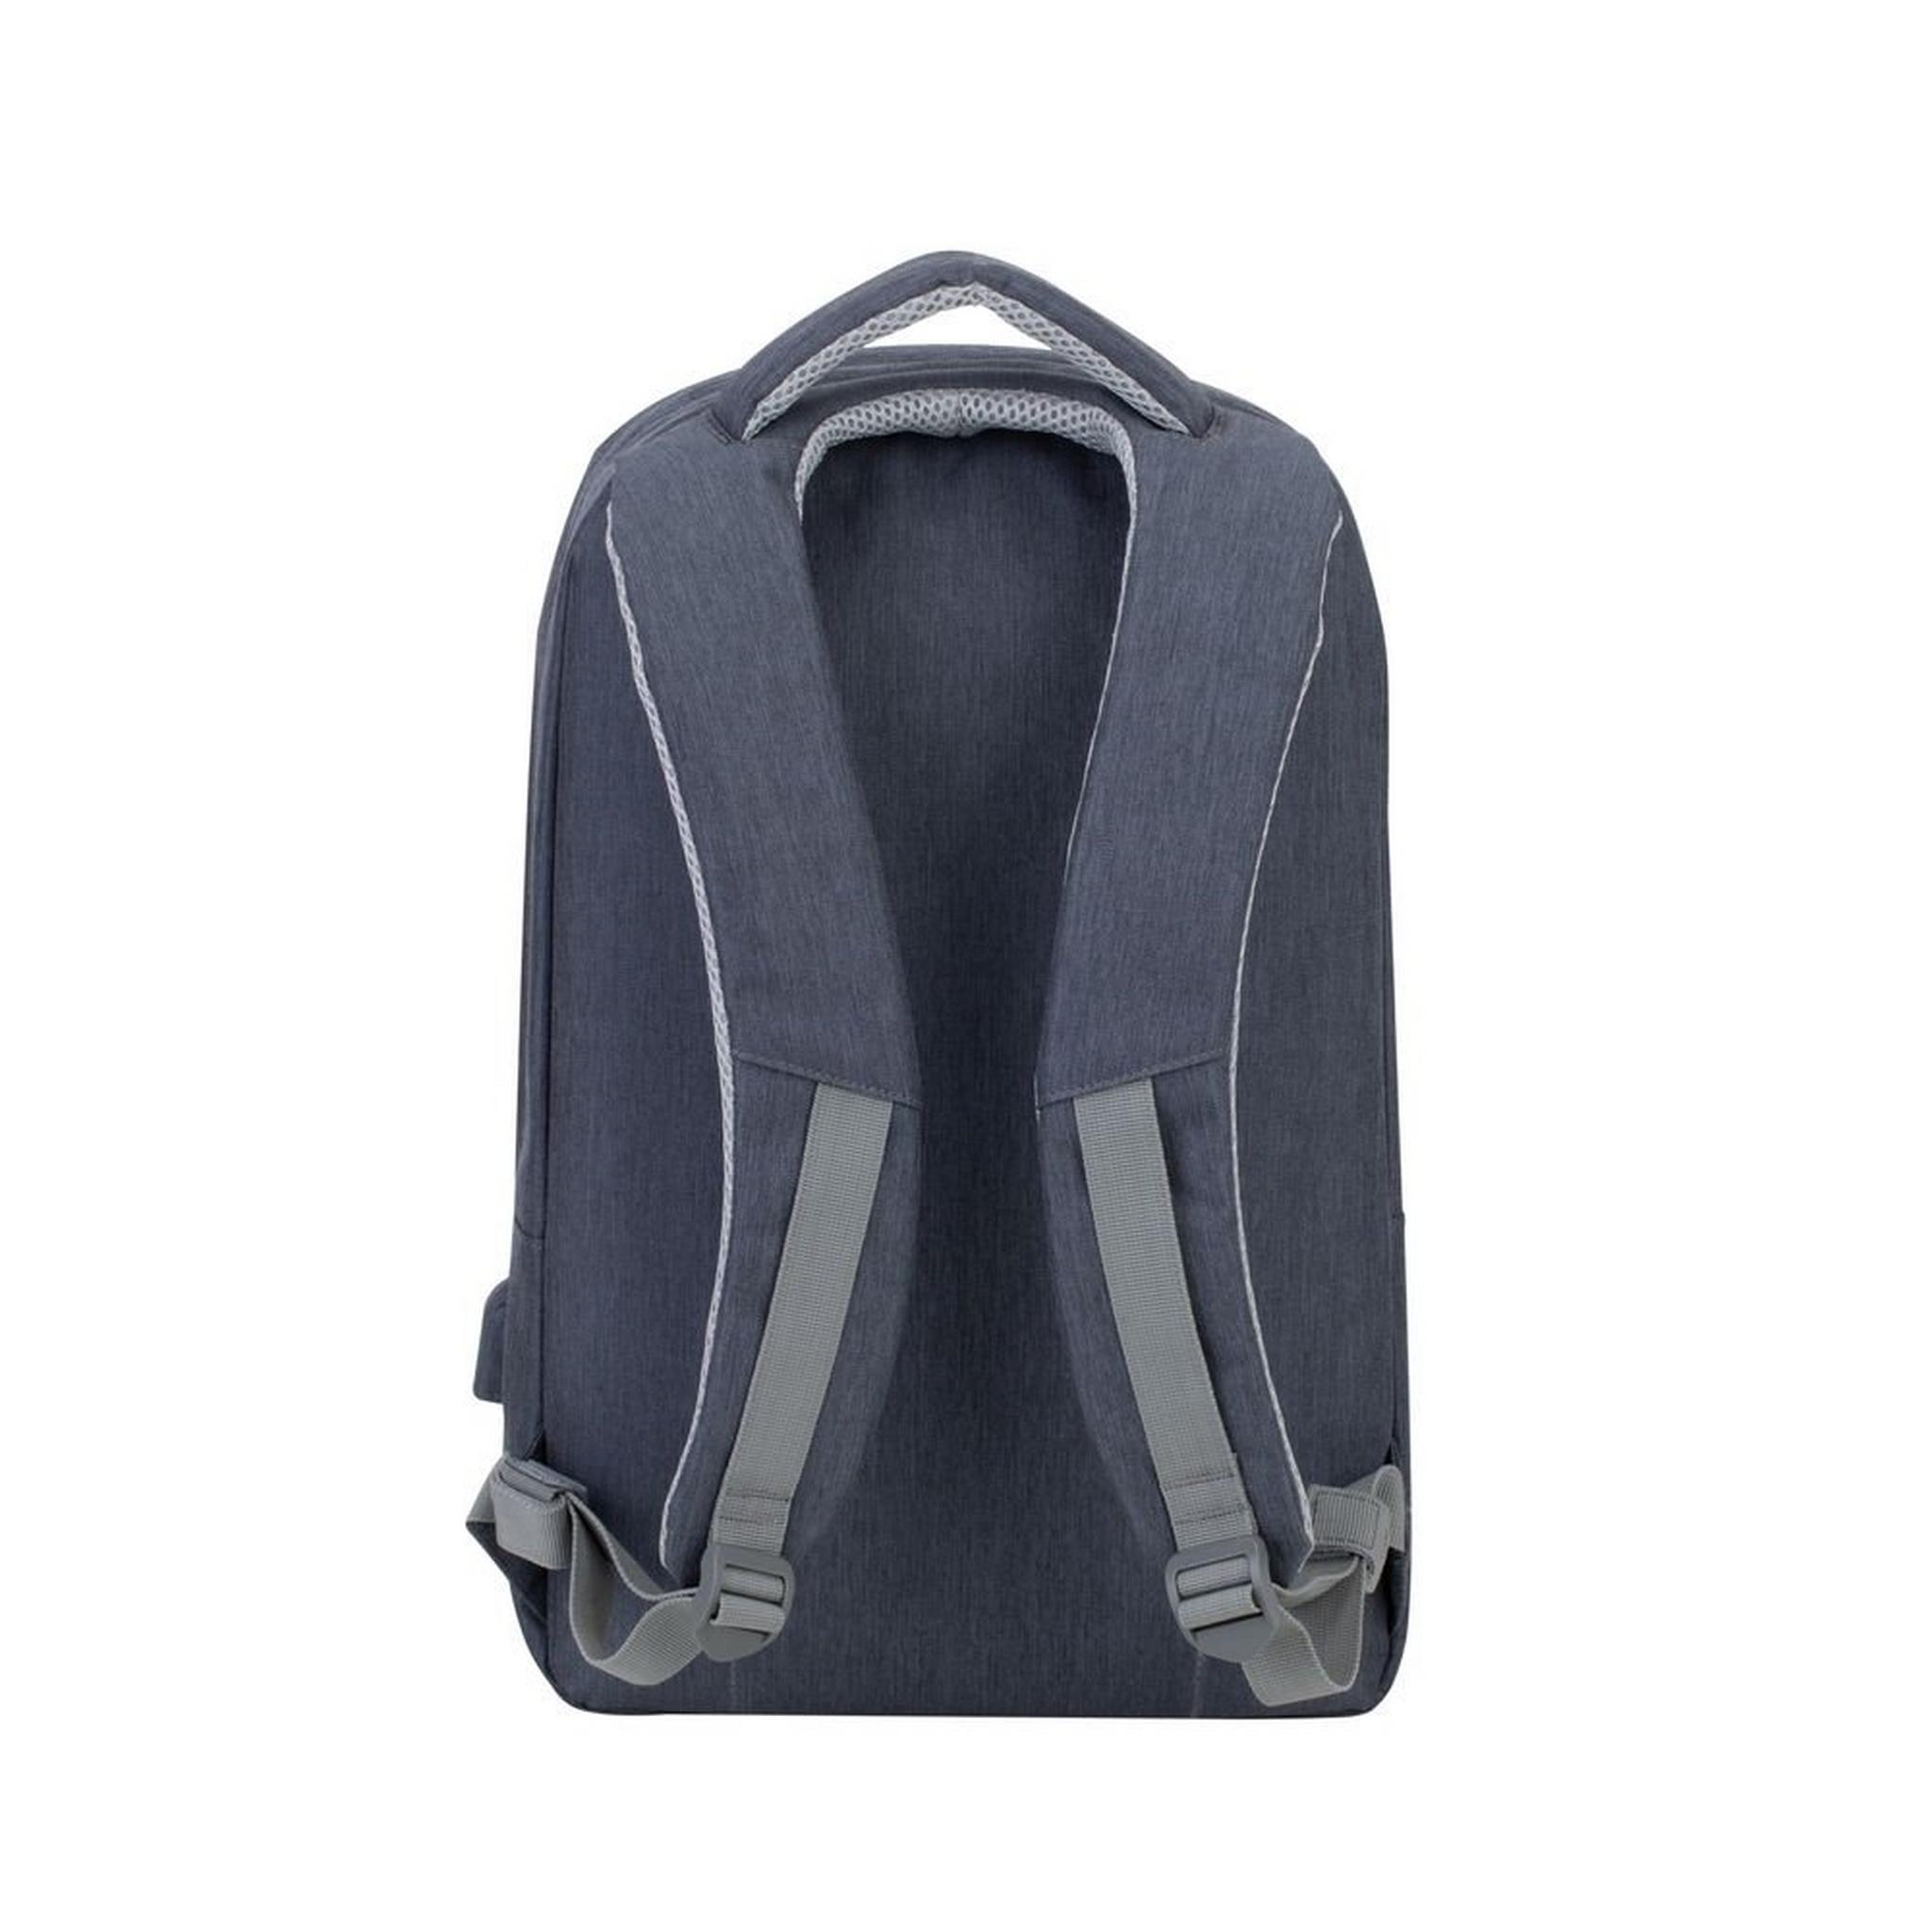 RIVACASE Prater Anti-Theft 15.6" Laptop Backpack - Grey